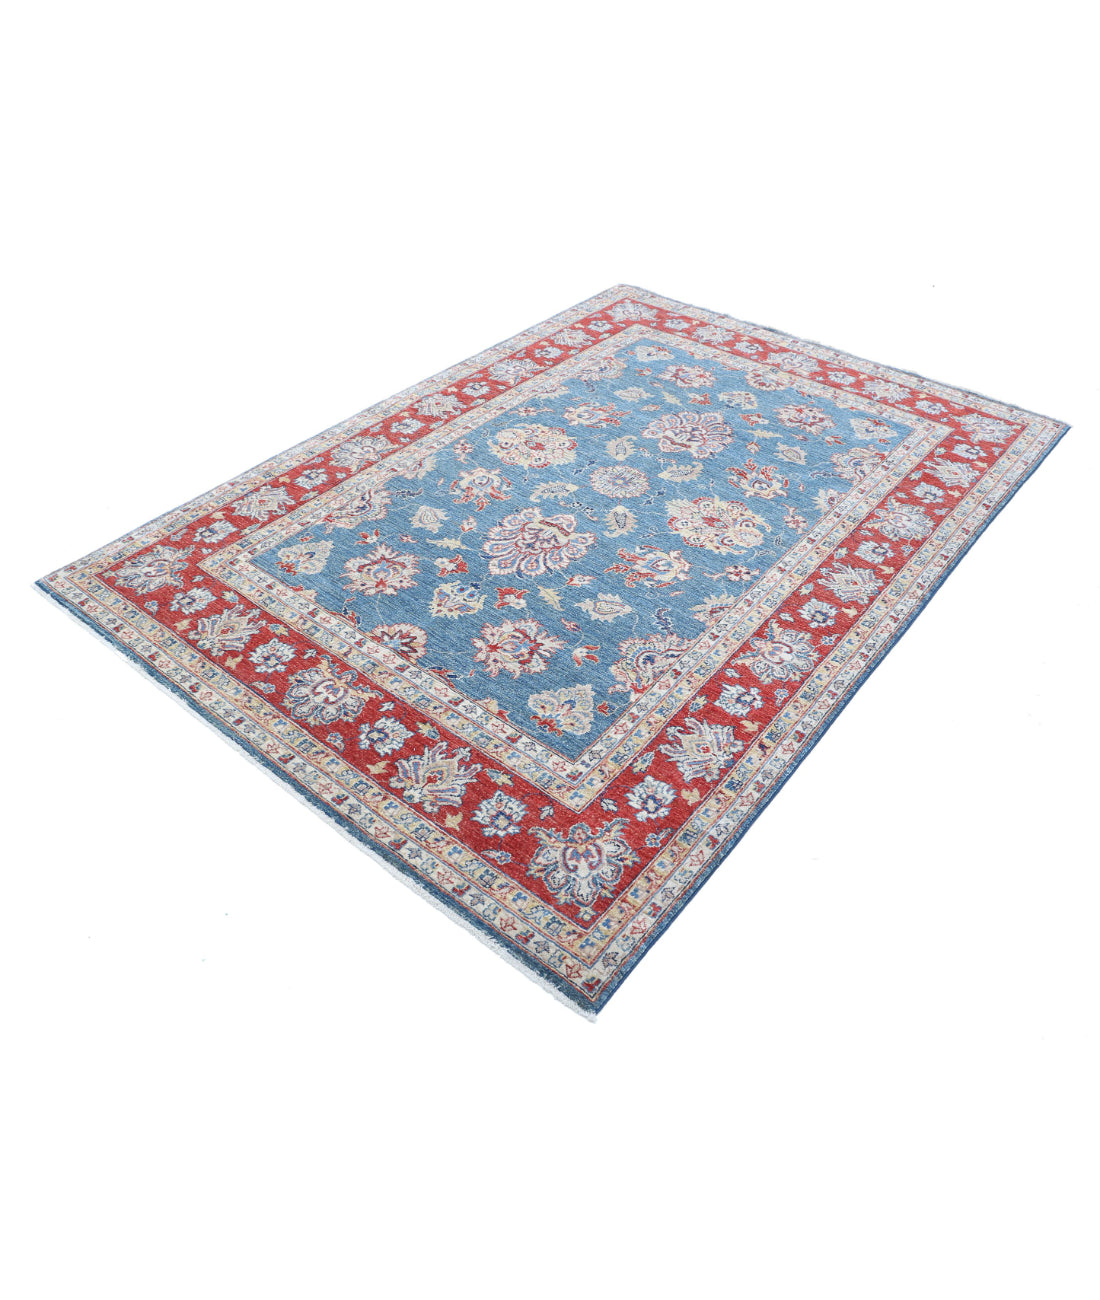 Ziegler 5'4'' X 7'9'' Hand-Knotted Wool Rug 5'4'' x 7'9'' (160 X 233) / Blue / Red